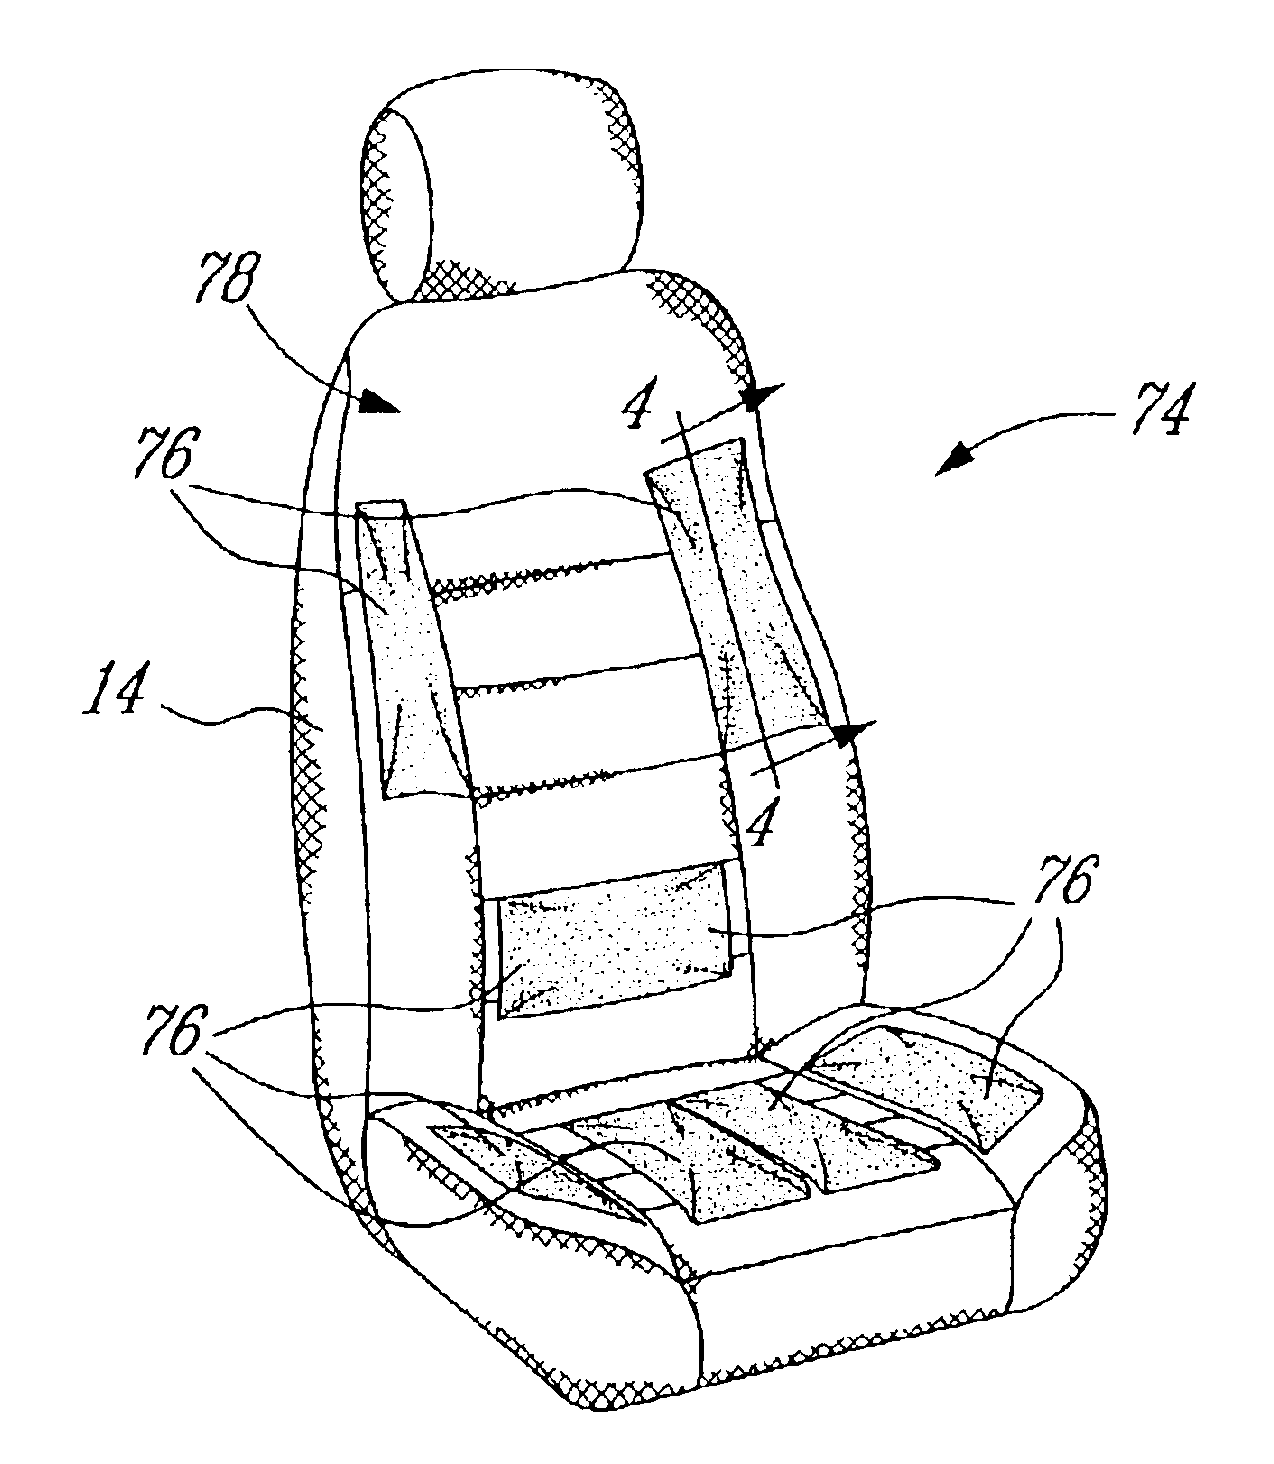 Portable air-pressure applying assembly for seats